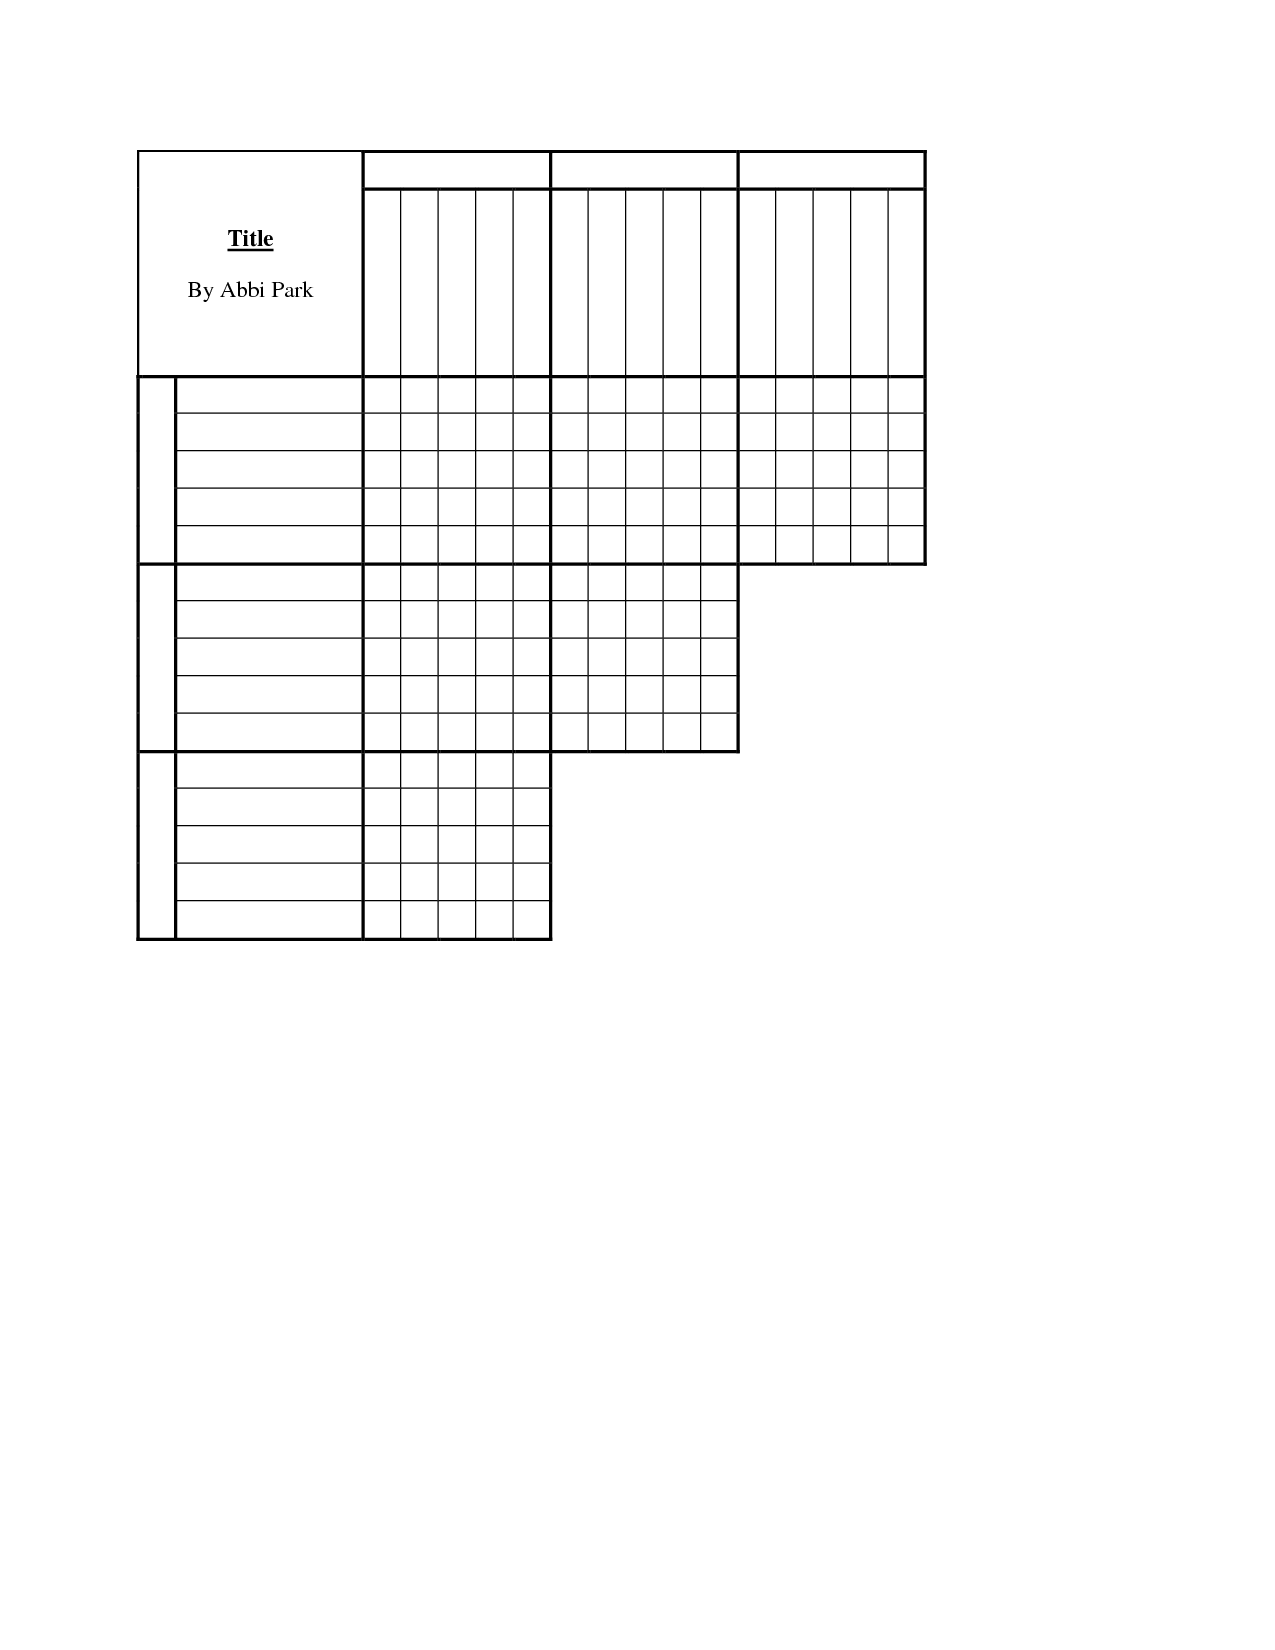 9-best-images-of-blank-crossword-puzzle-worksheet-blank-crossword-puzzle-template-printable